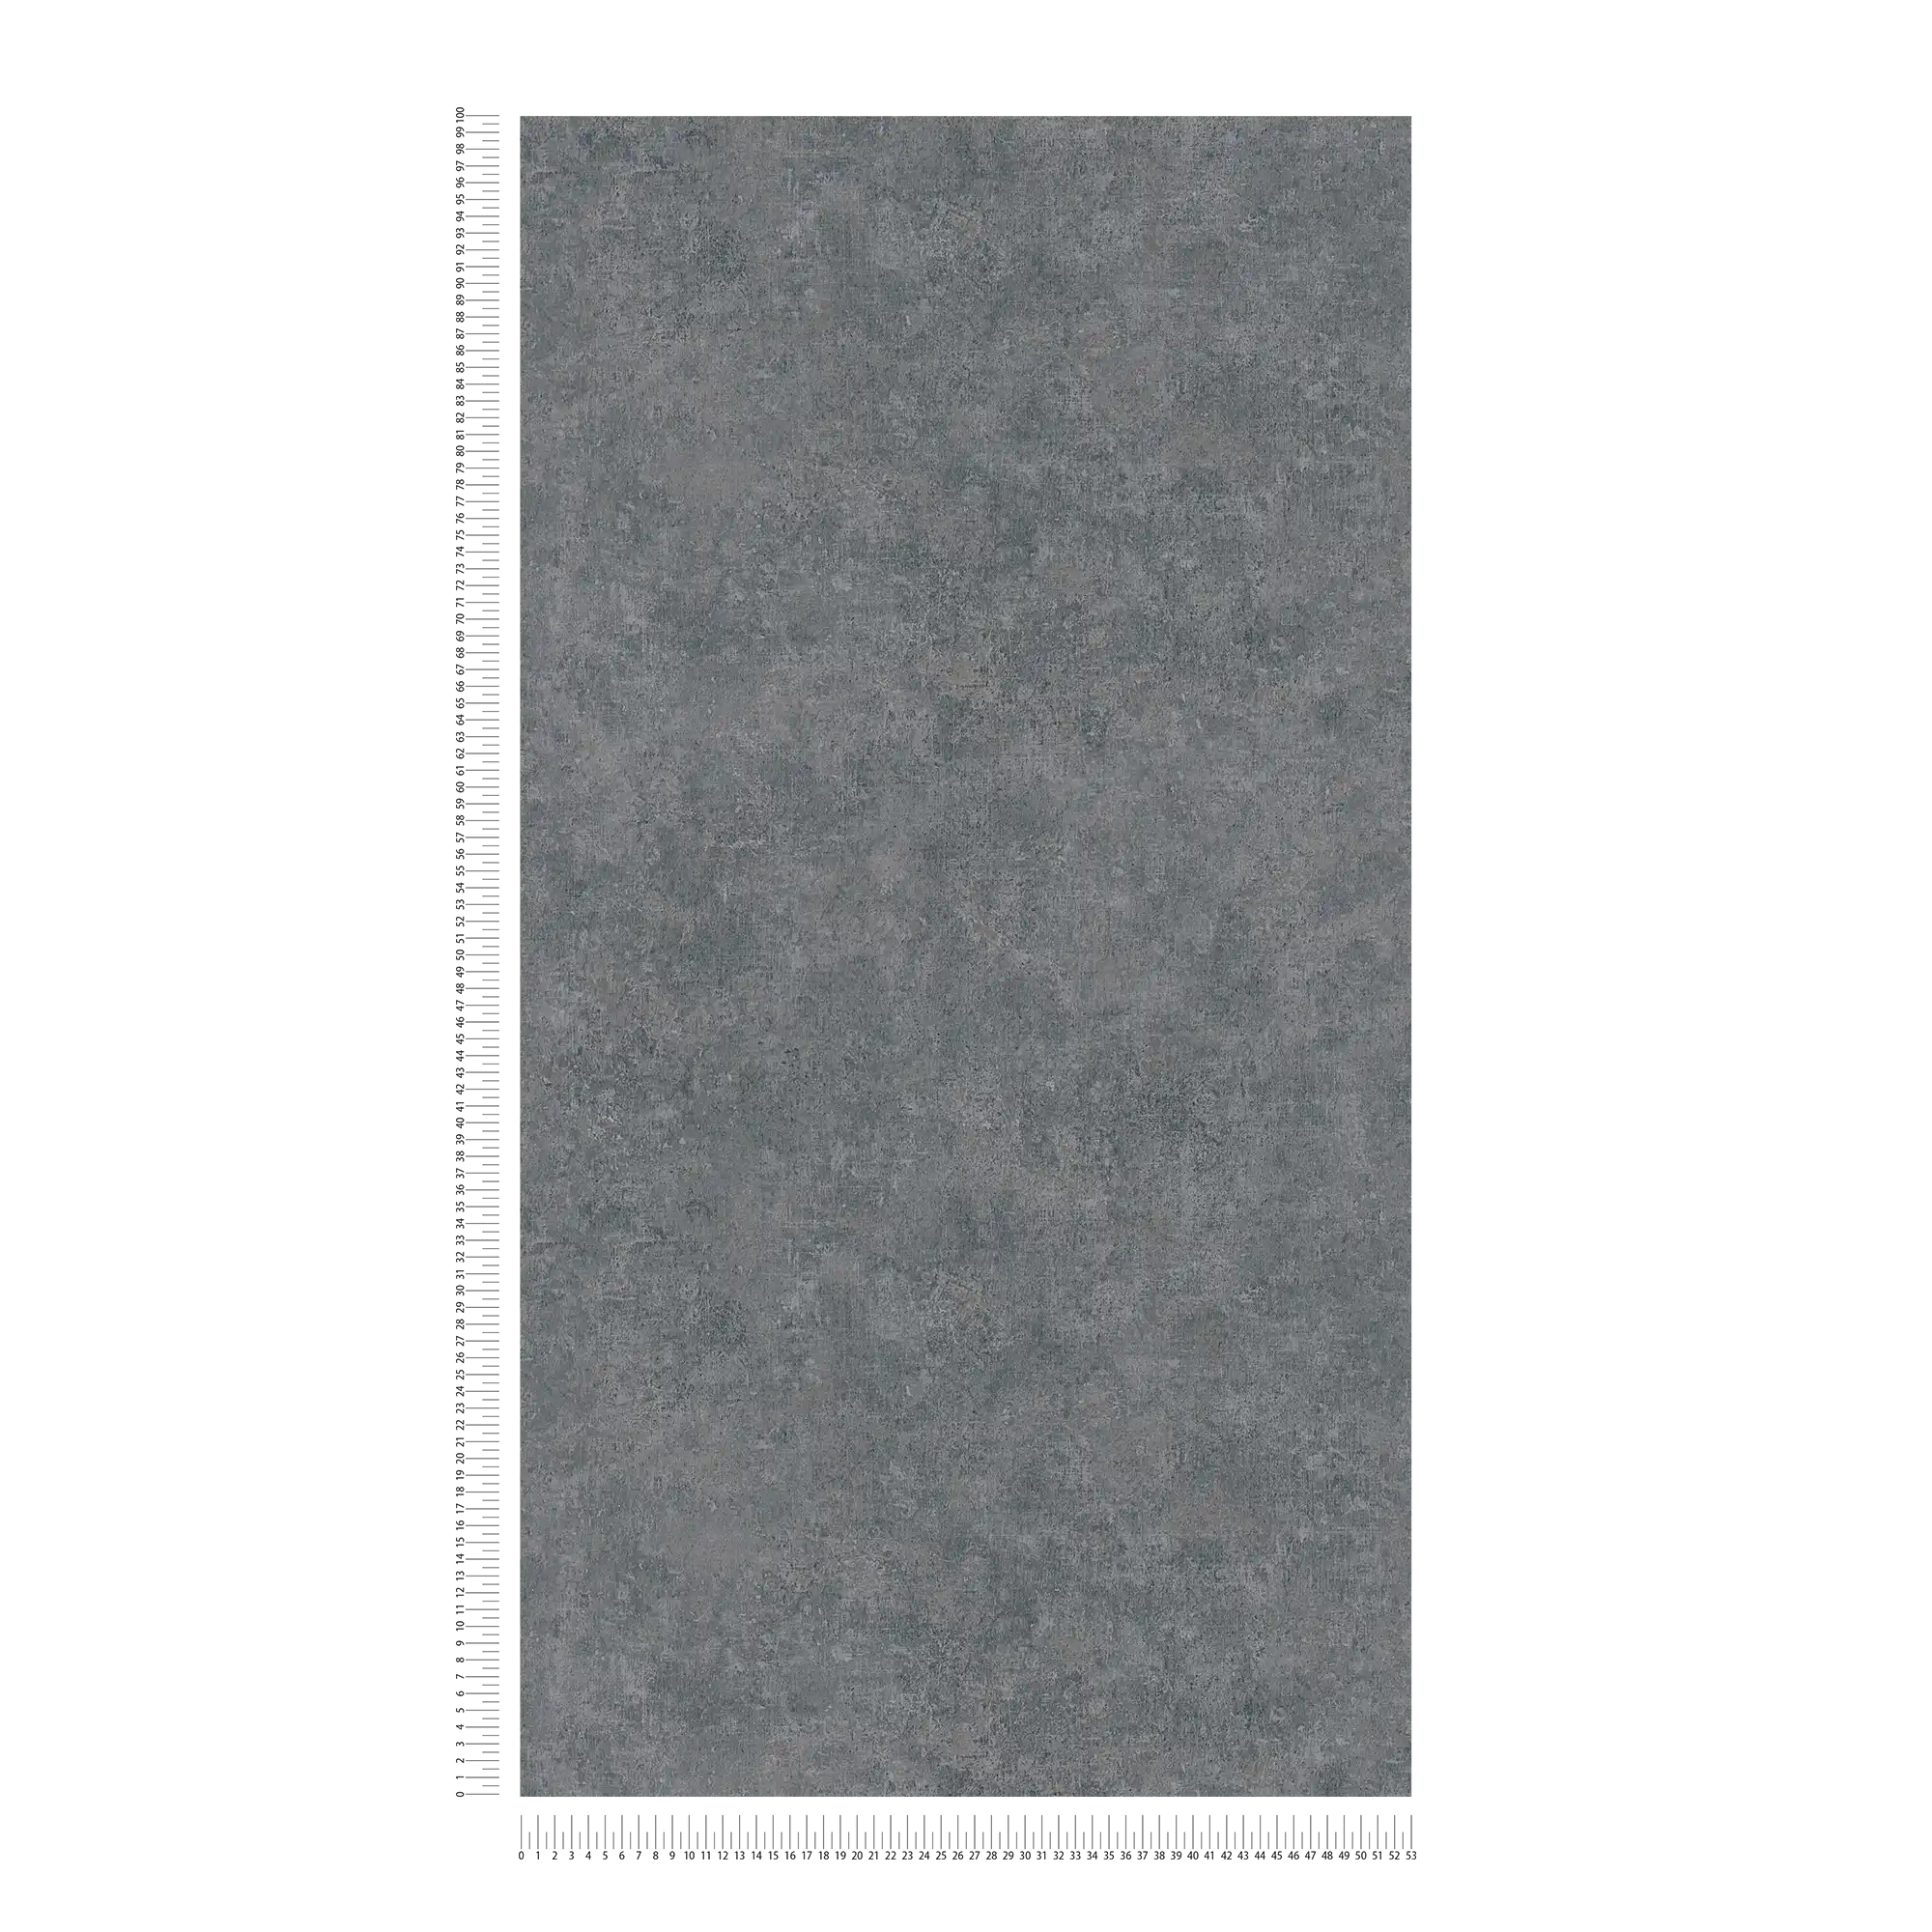             Non-woven wallpaper with tone-on-tone pattern, used look - grey
        